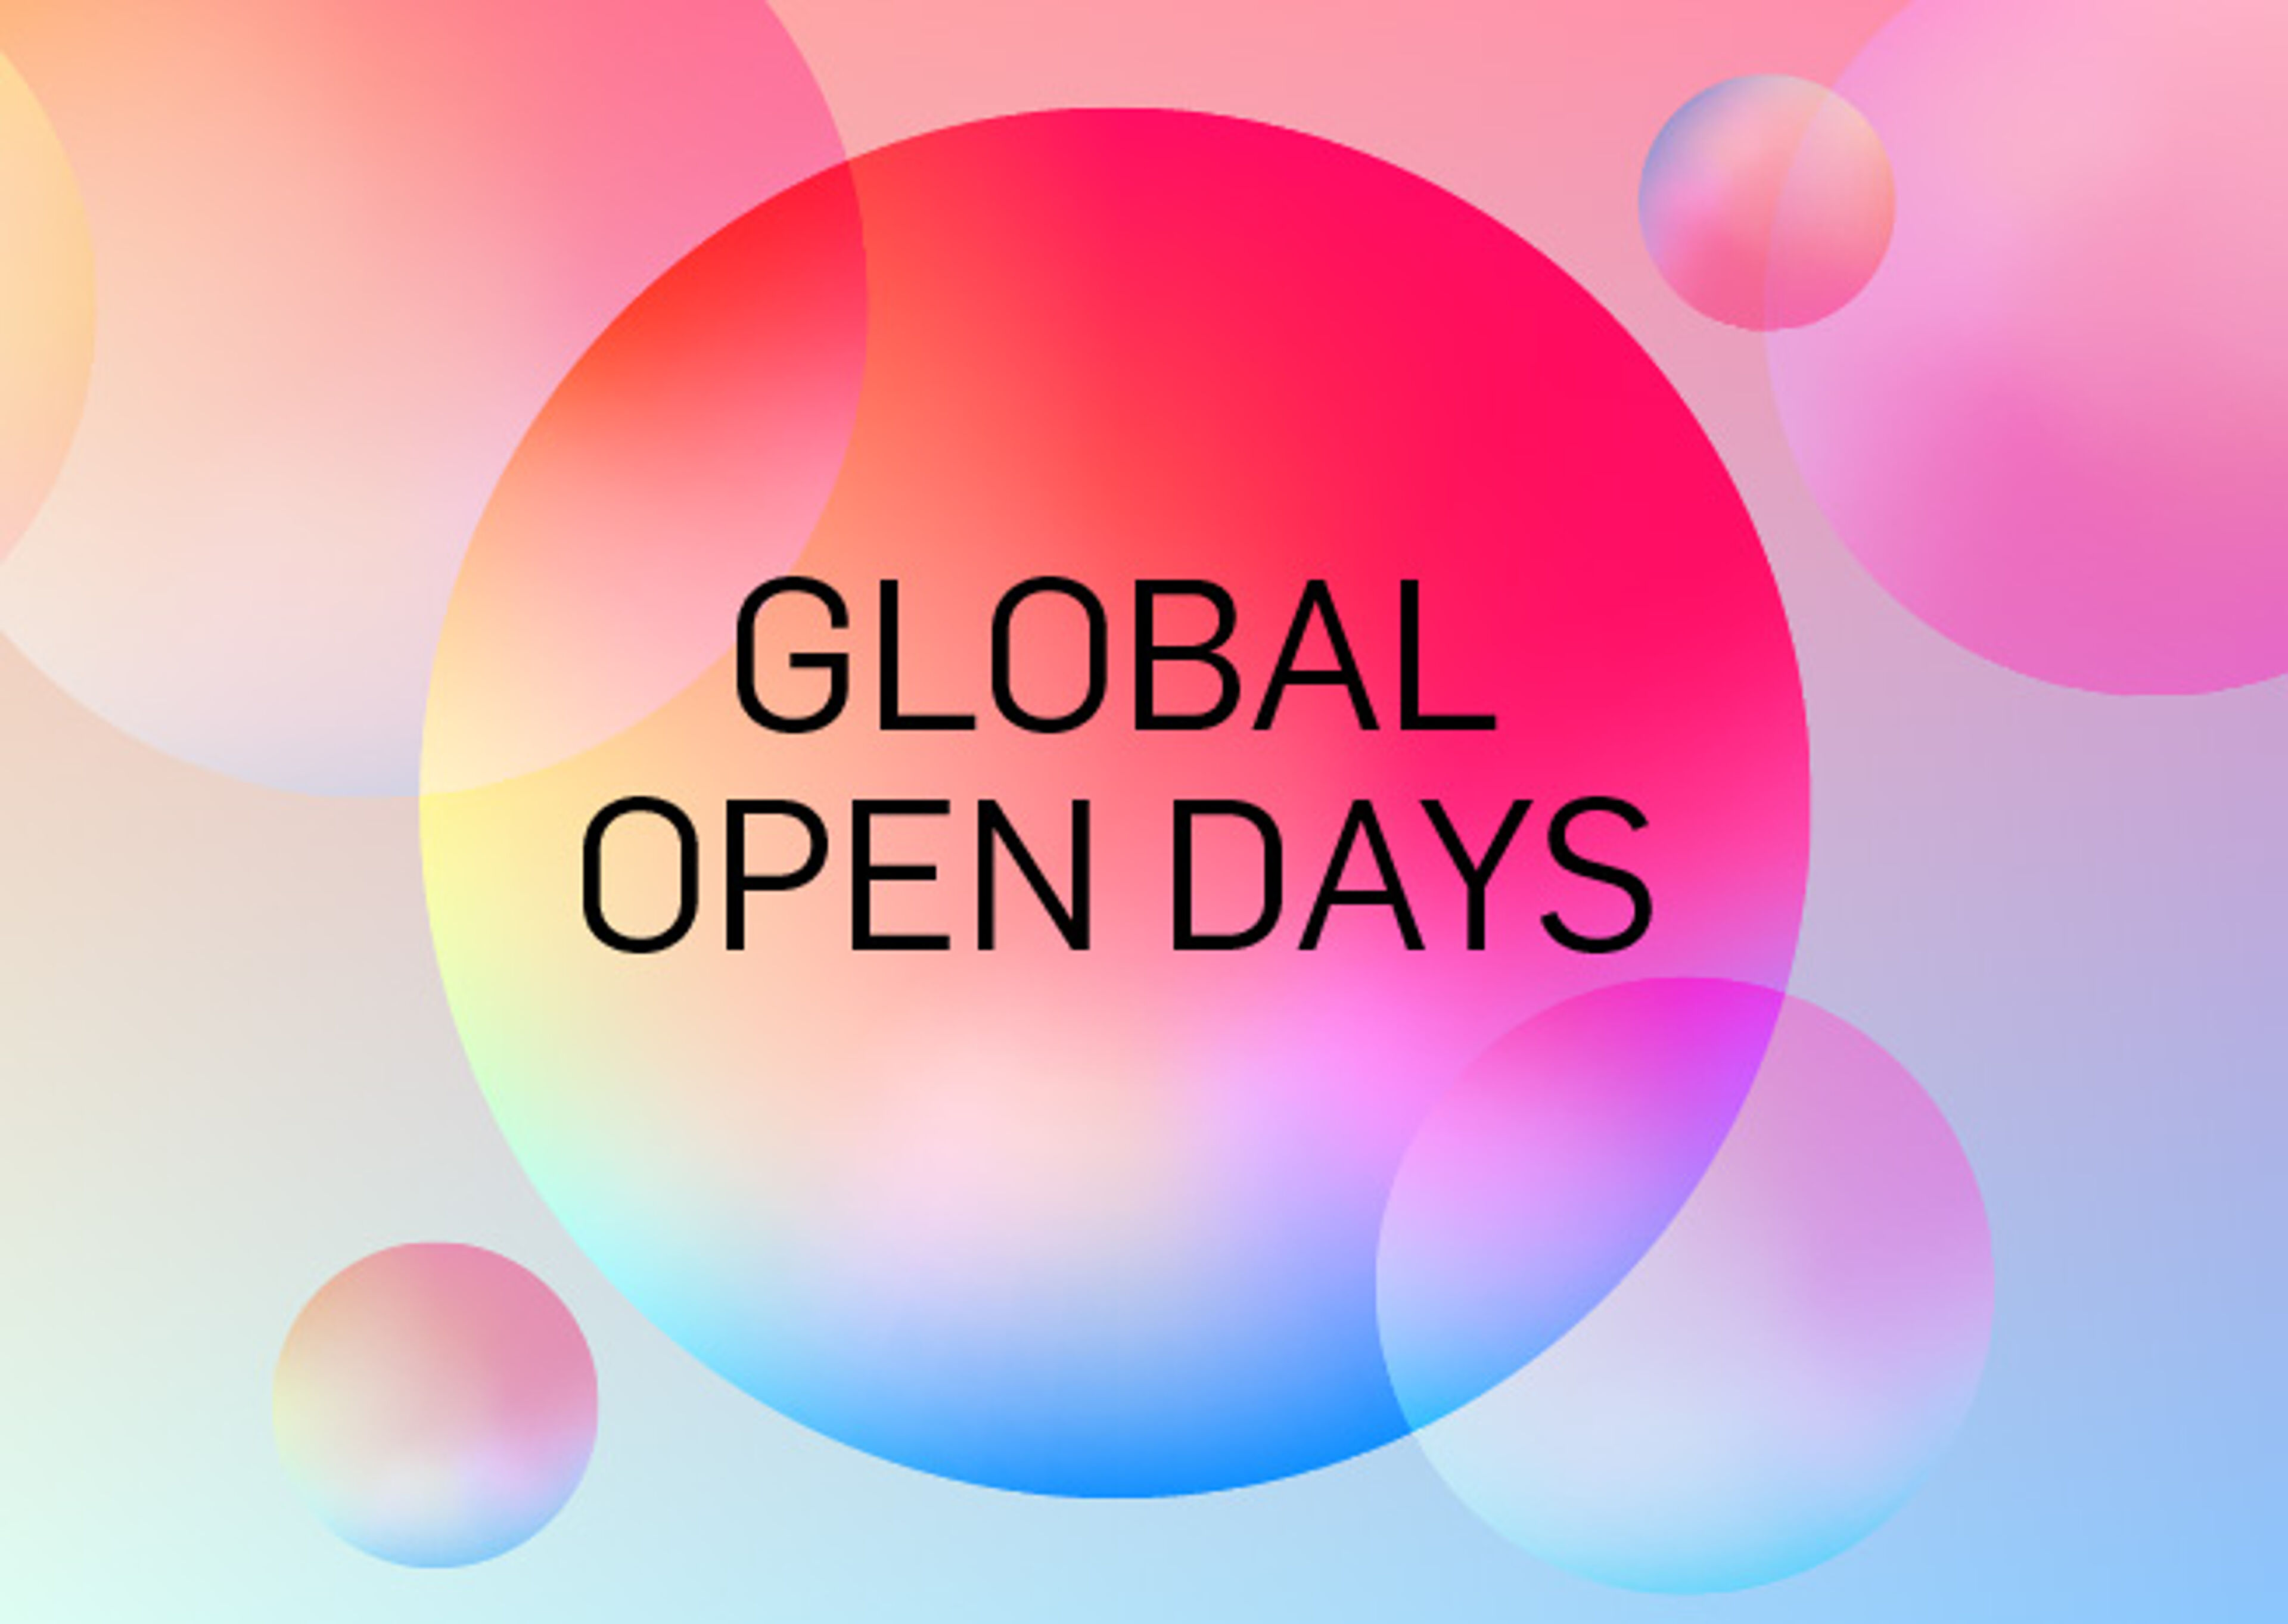 An abstract, vibrant poster for "Global Open Days" featuring overlapping translucent circles in a gradient of pink and blue hues.